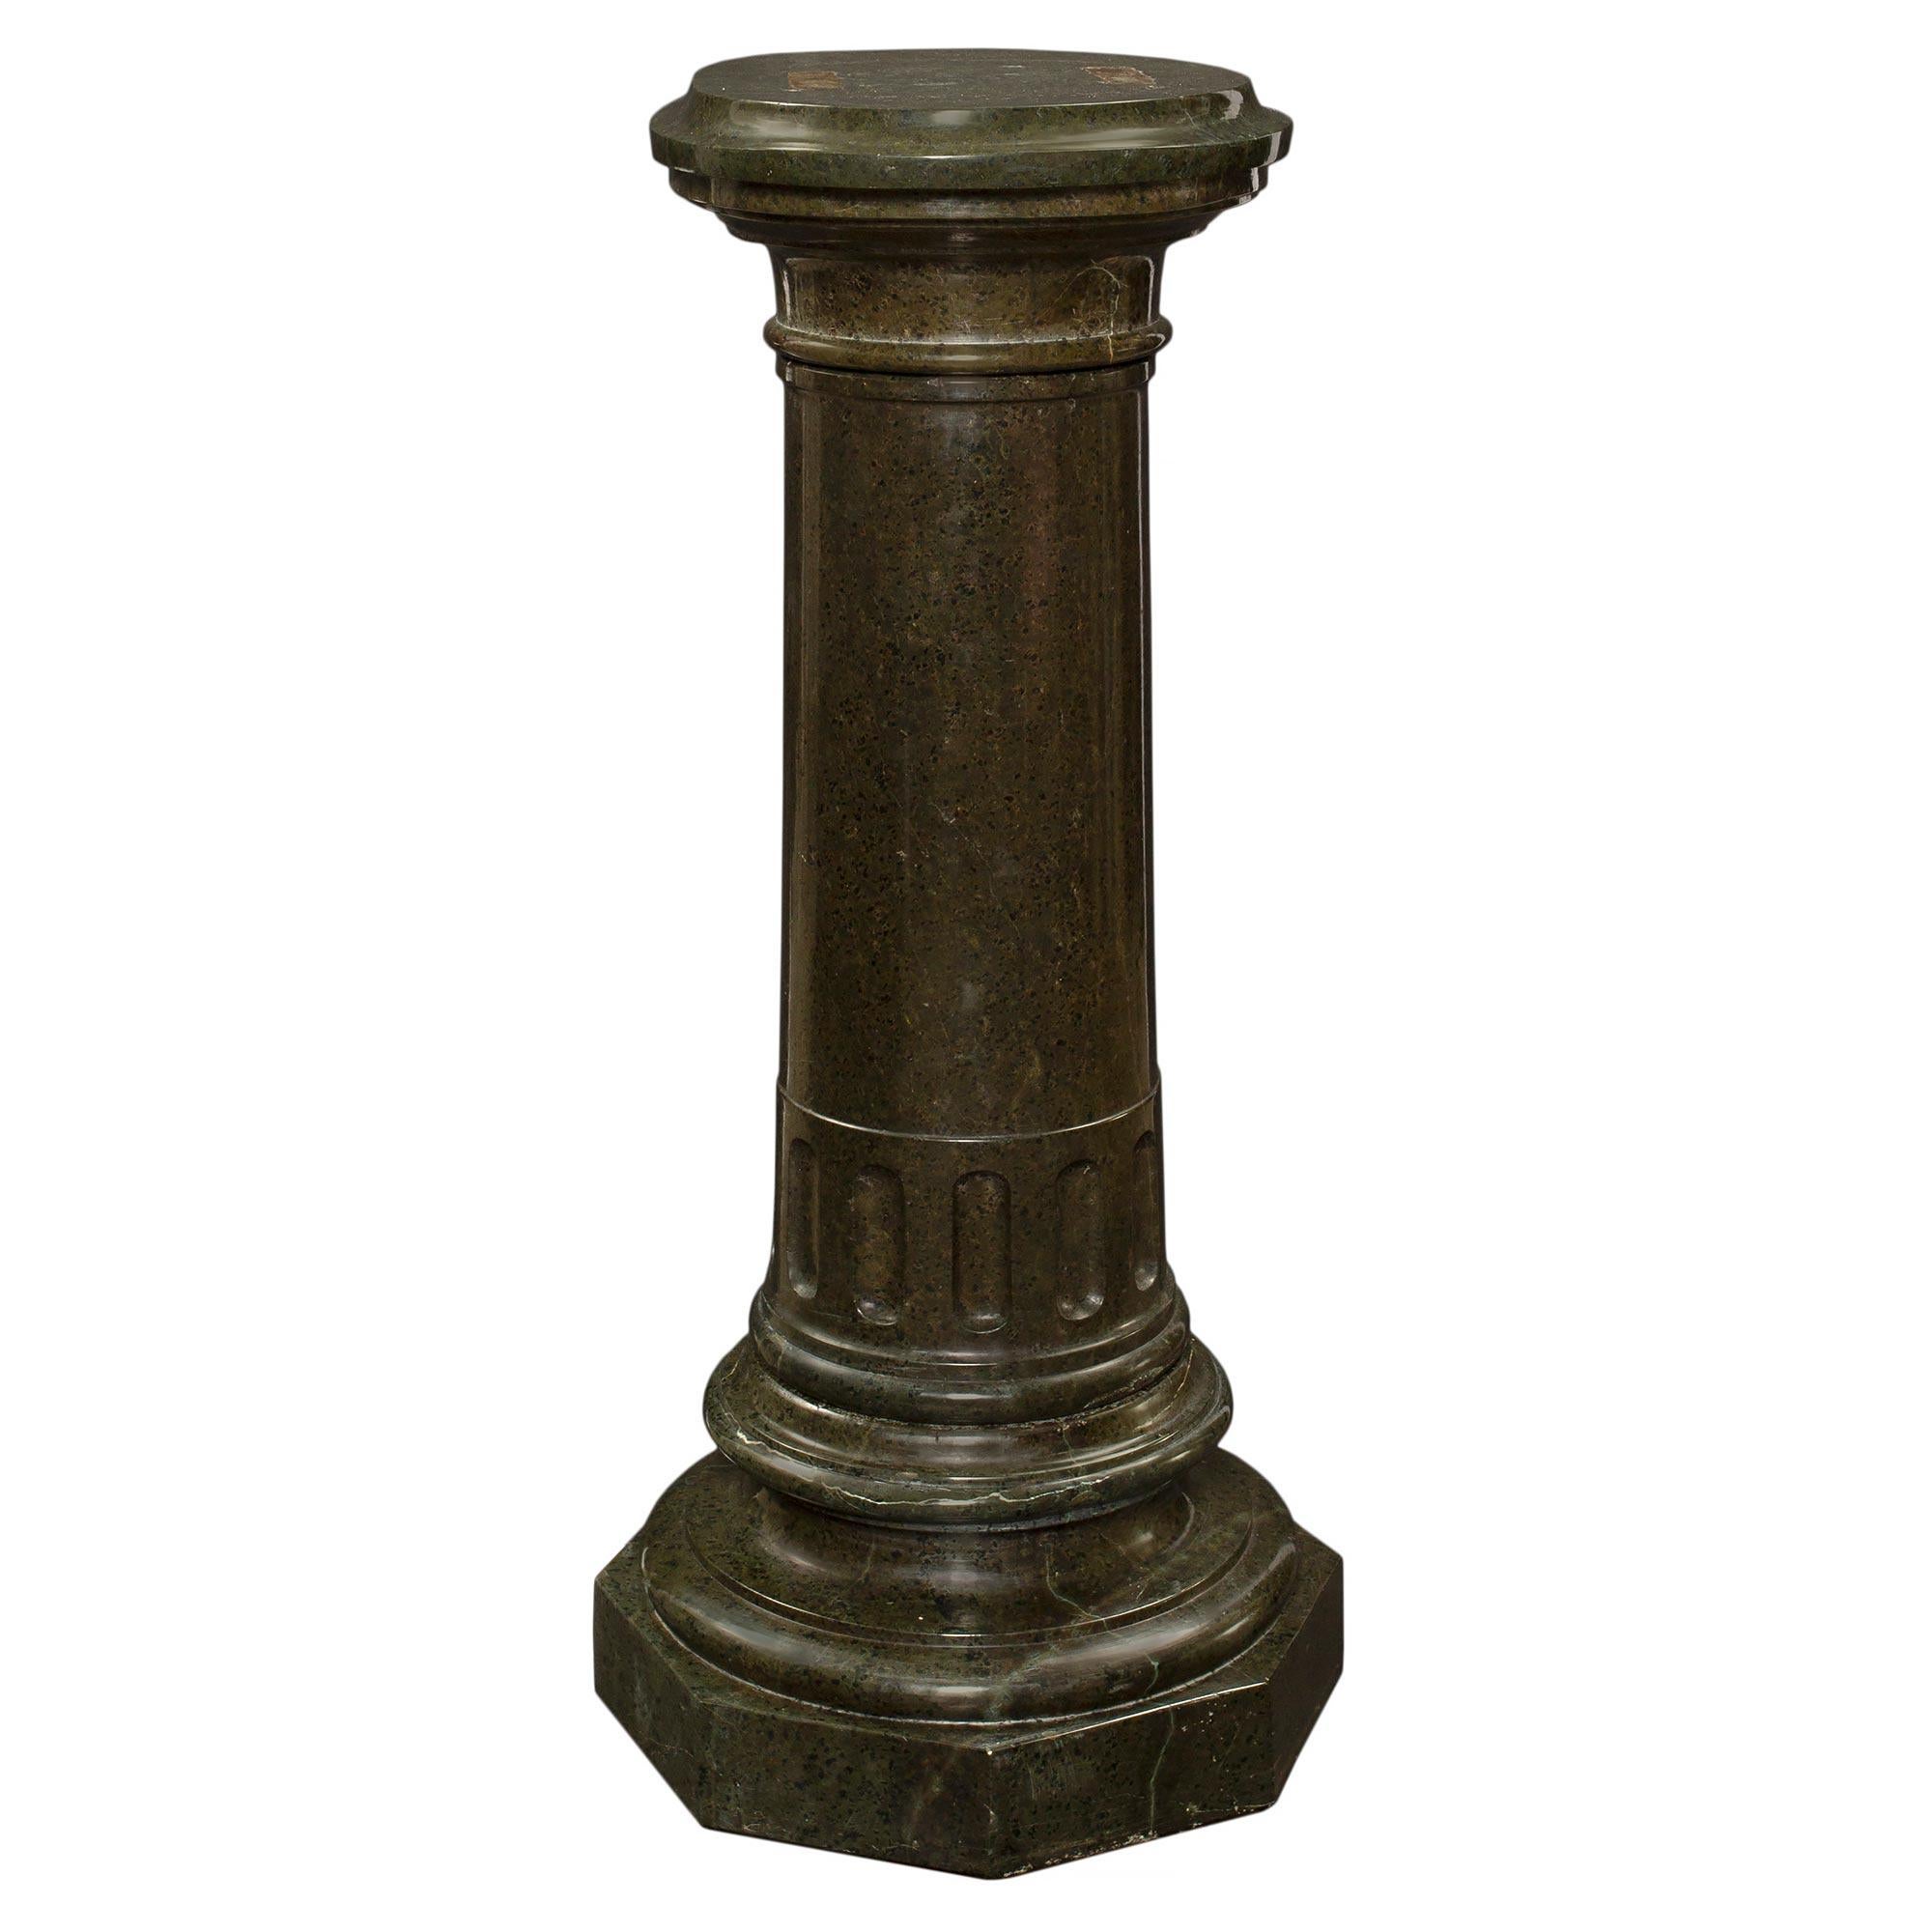 A handsome Italian 19th century green marble three piece pedestal. The pedestal is raised by a thick octagon base with a mottled design. The central column has flutes under the mottled swiveling 'D' shaped top.

  